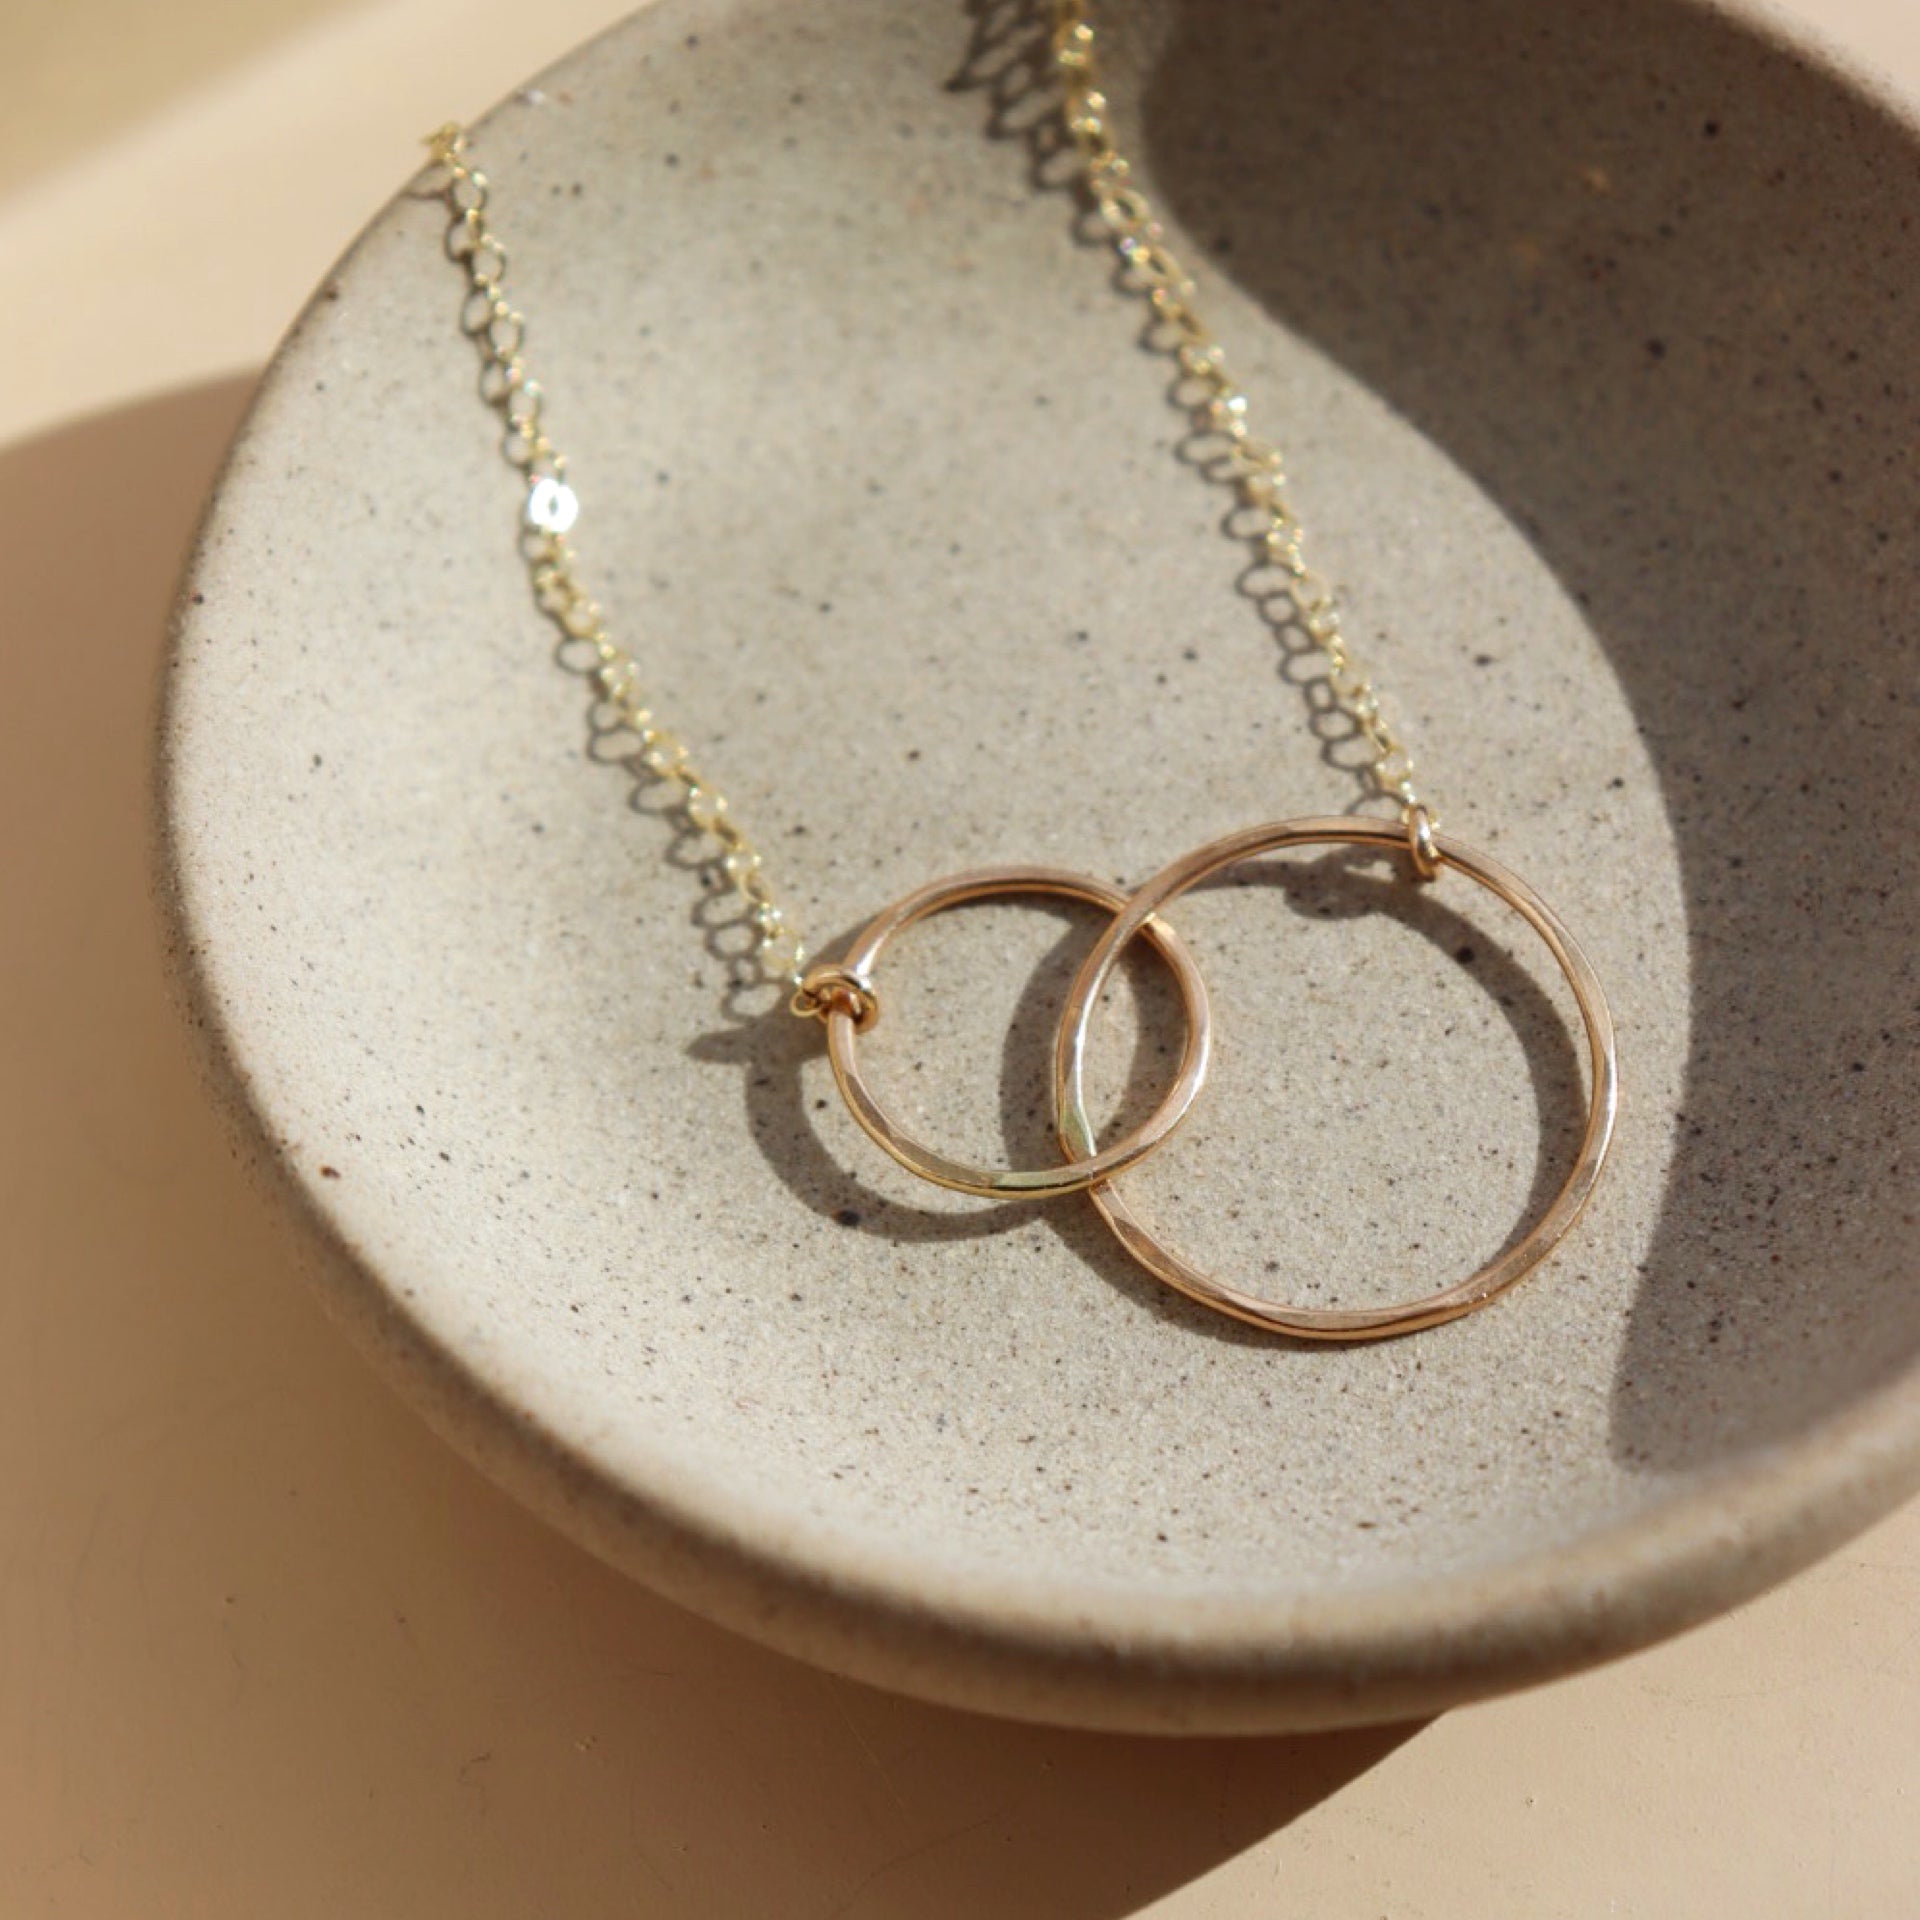 UNITY Simple Necklace with Medium Pendant in Silver & Gold Plated Silv -  Corinne Hamak Jewellery